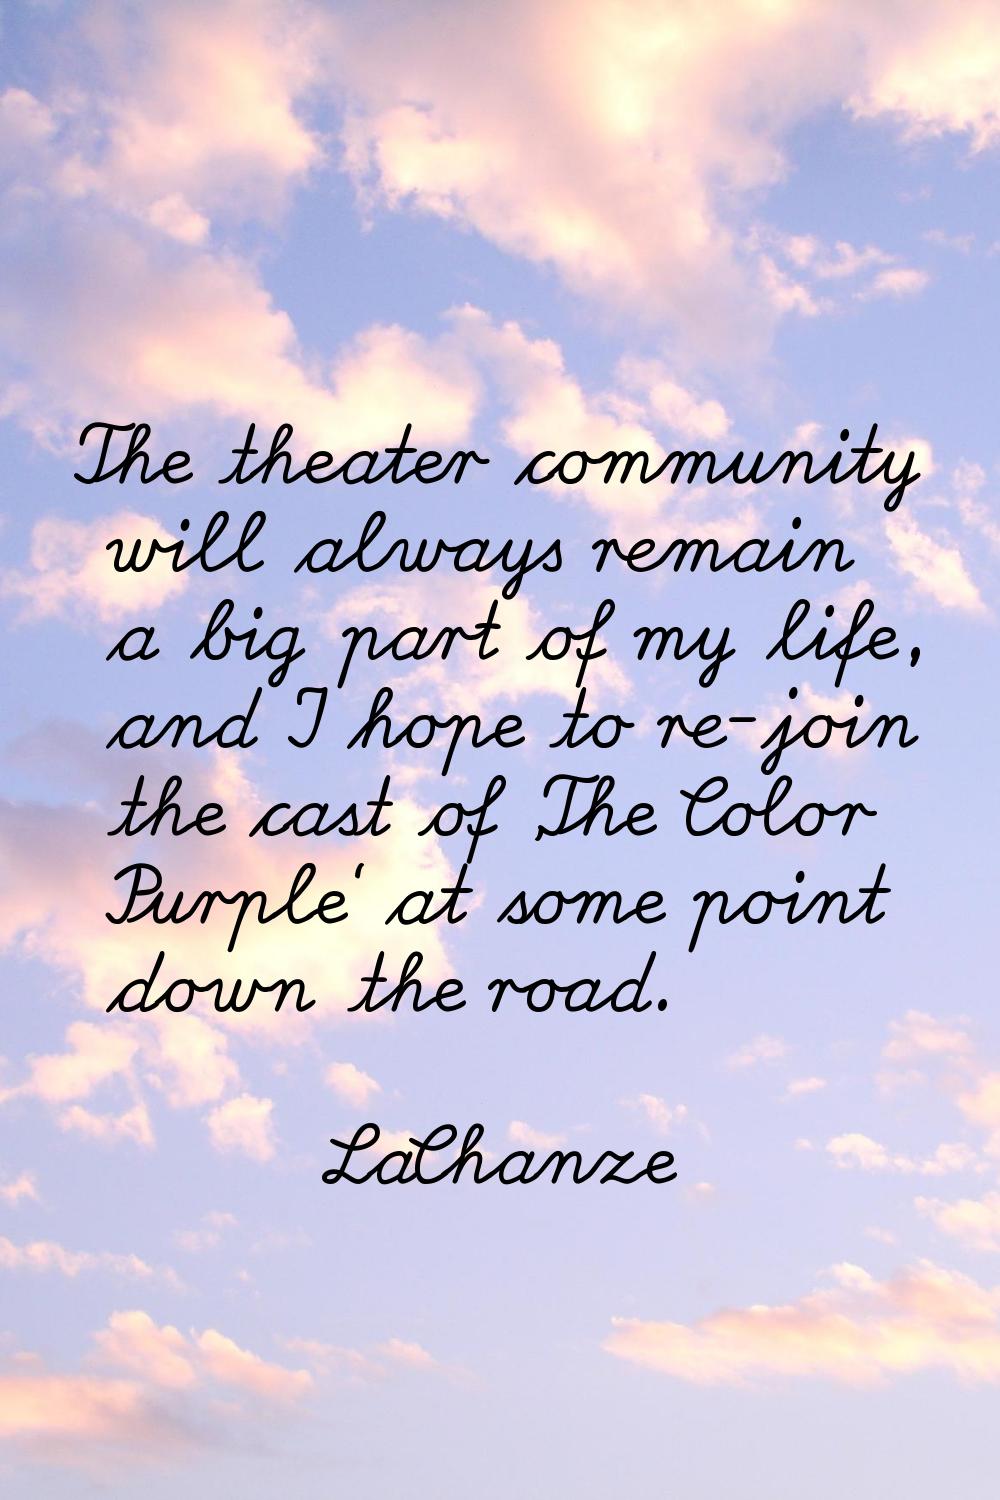 The theater community will always remain a big part of my life, and I hope to re-join the cast of '